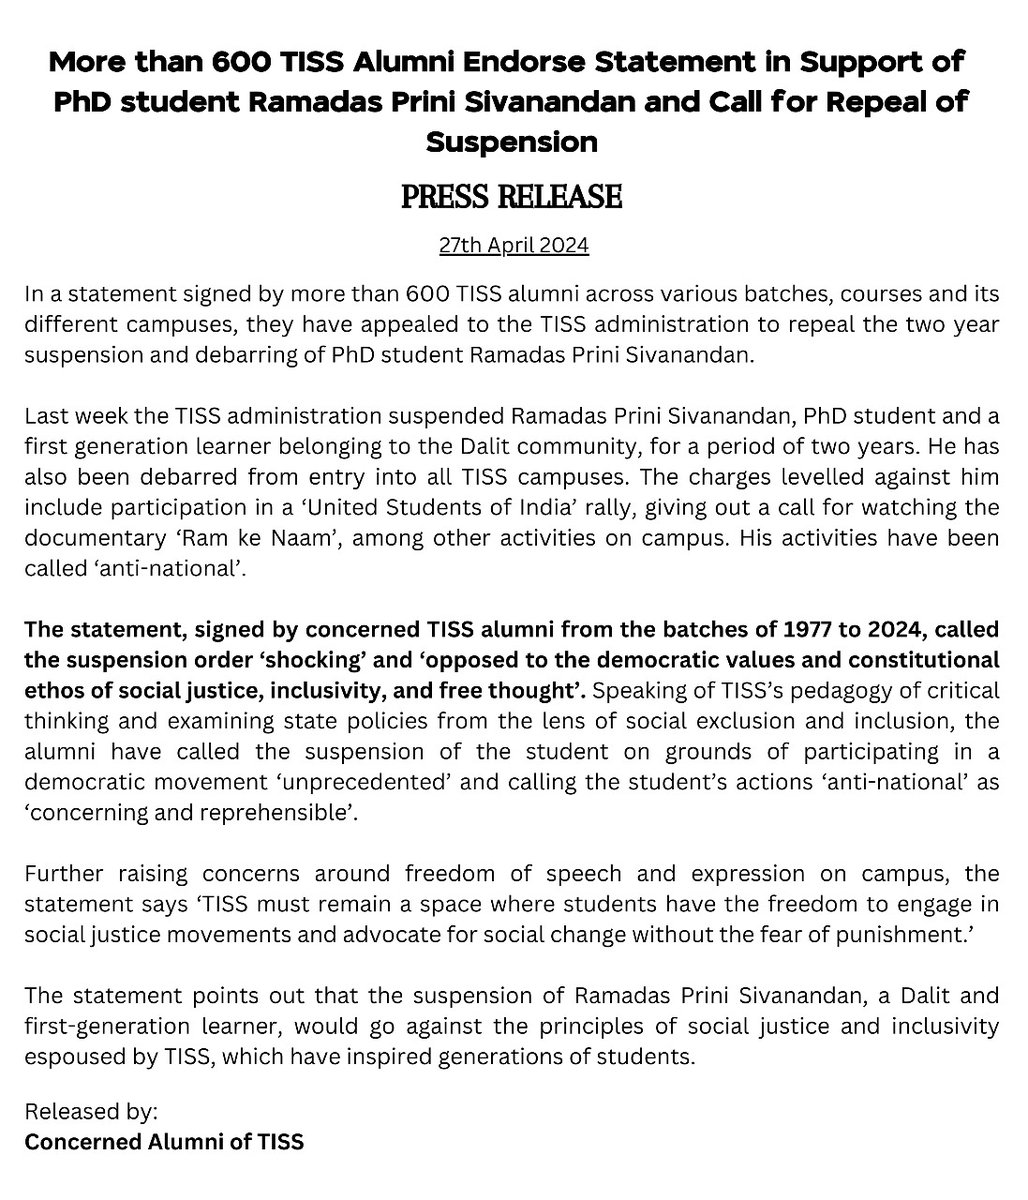 More than 600 concerned alumni of @TISSpeak have signed a statement in solidarity with Ramadas Prini Sivanandan. They have appealed to the admin to immediately revoke the two year suspension order which goes against the democratic values, ethos of social justice & inclusivity.